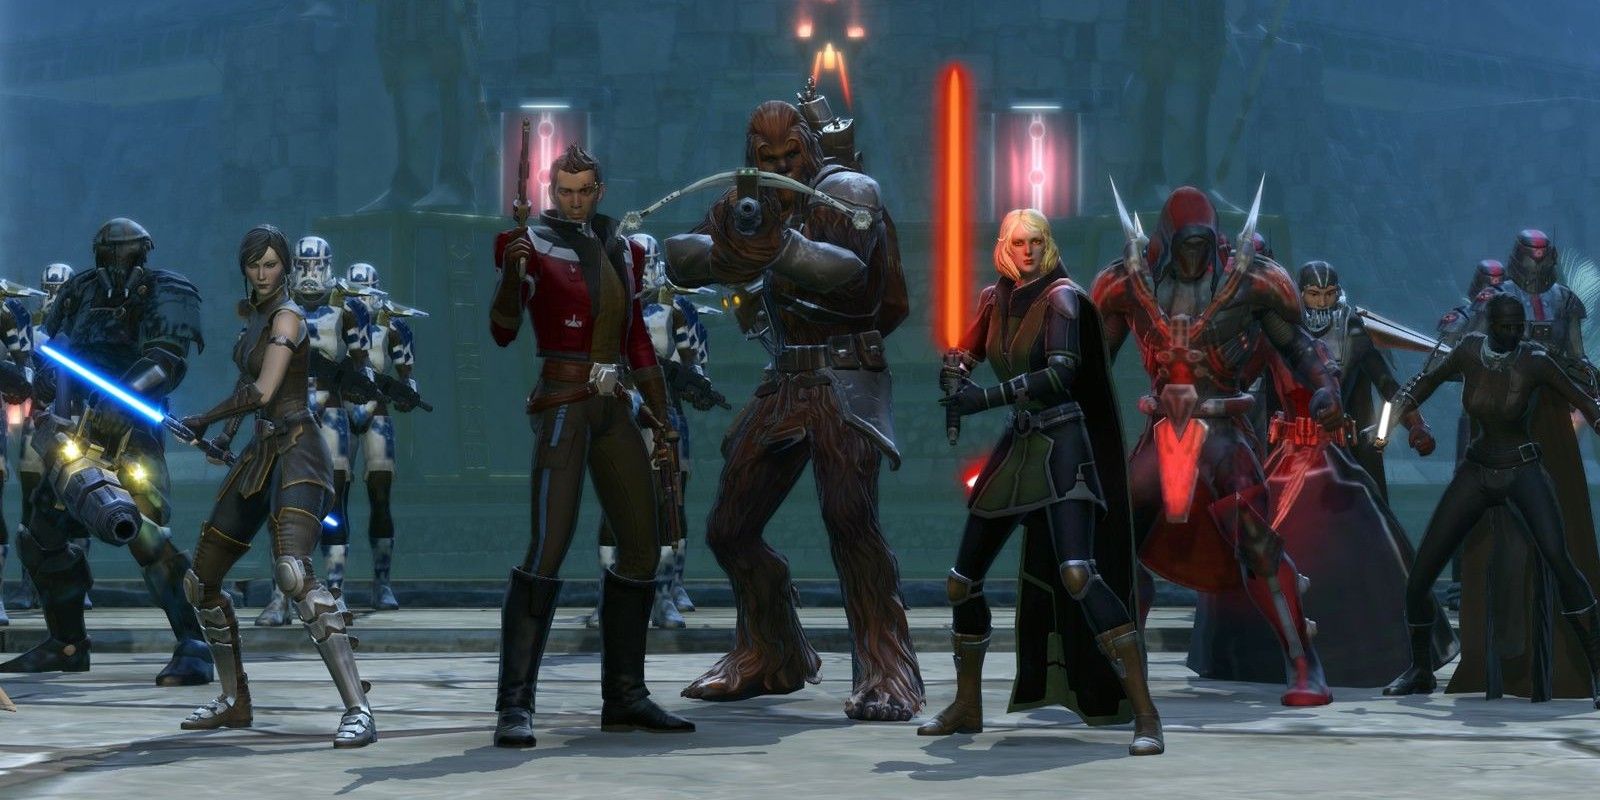 Characters in Star Wars: The Old Republic